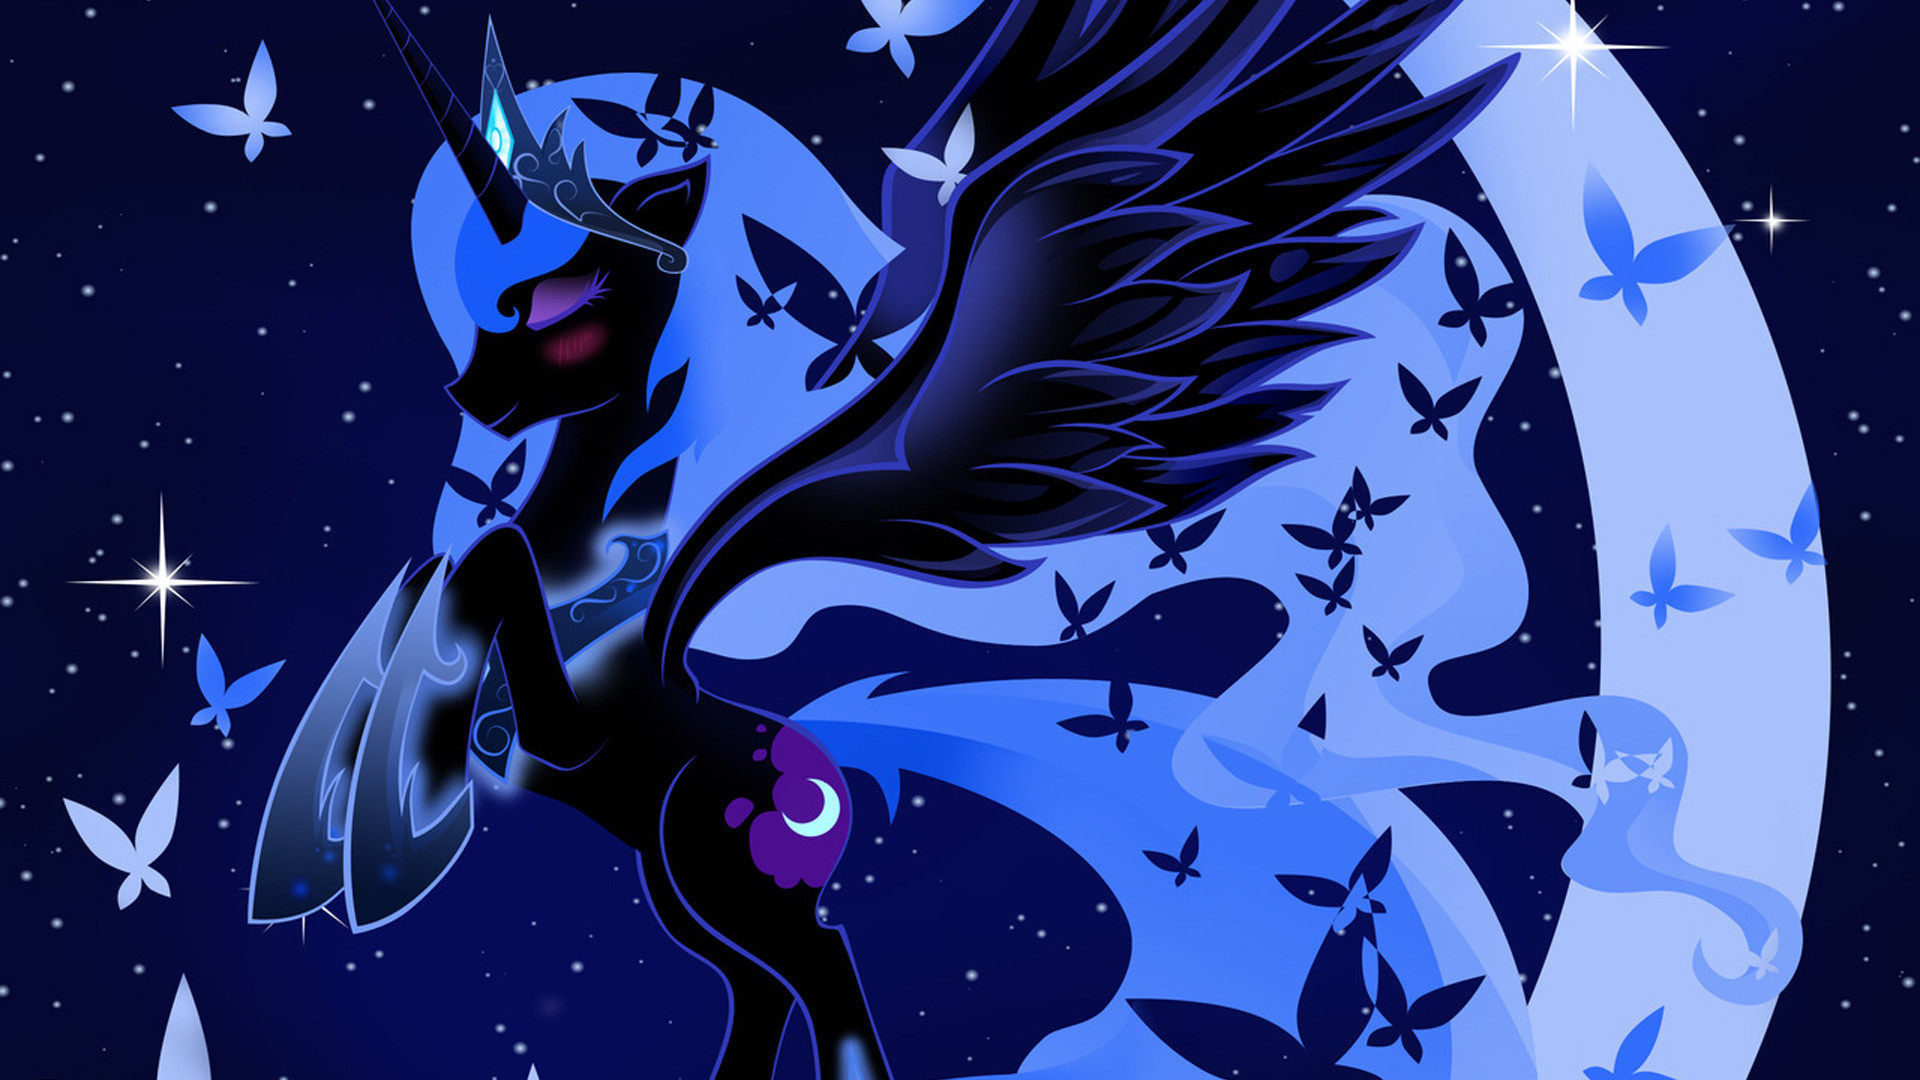 1920x1080 Princess Luna from Shadow of Death - hosted by Neoseeker